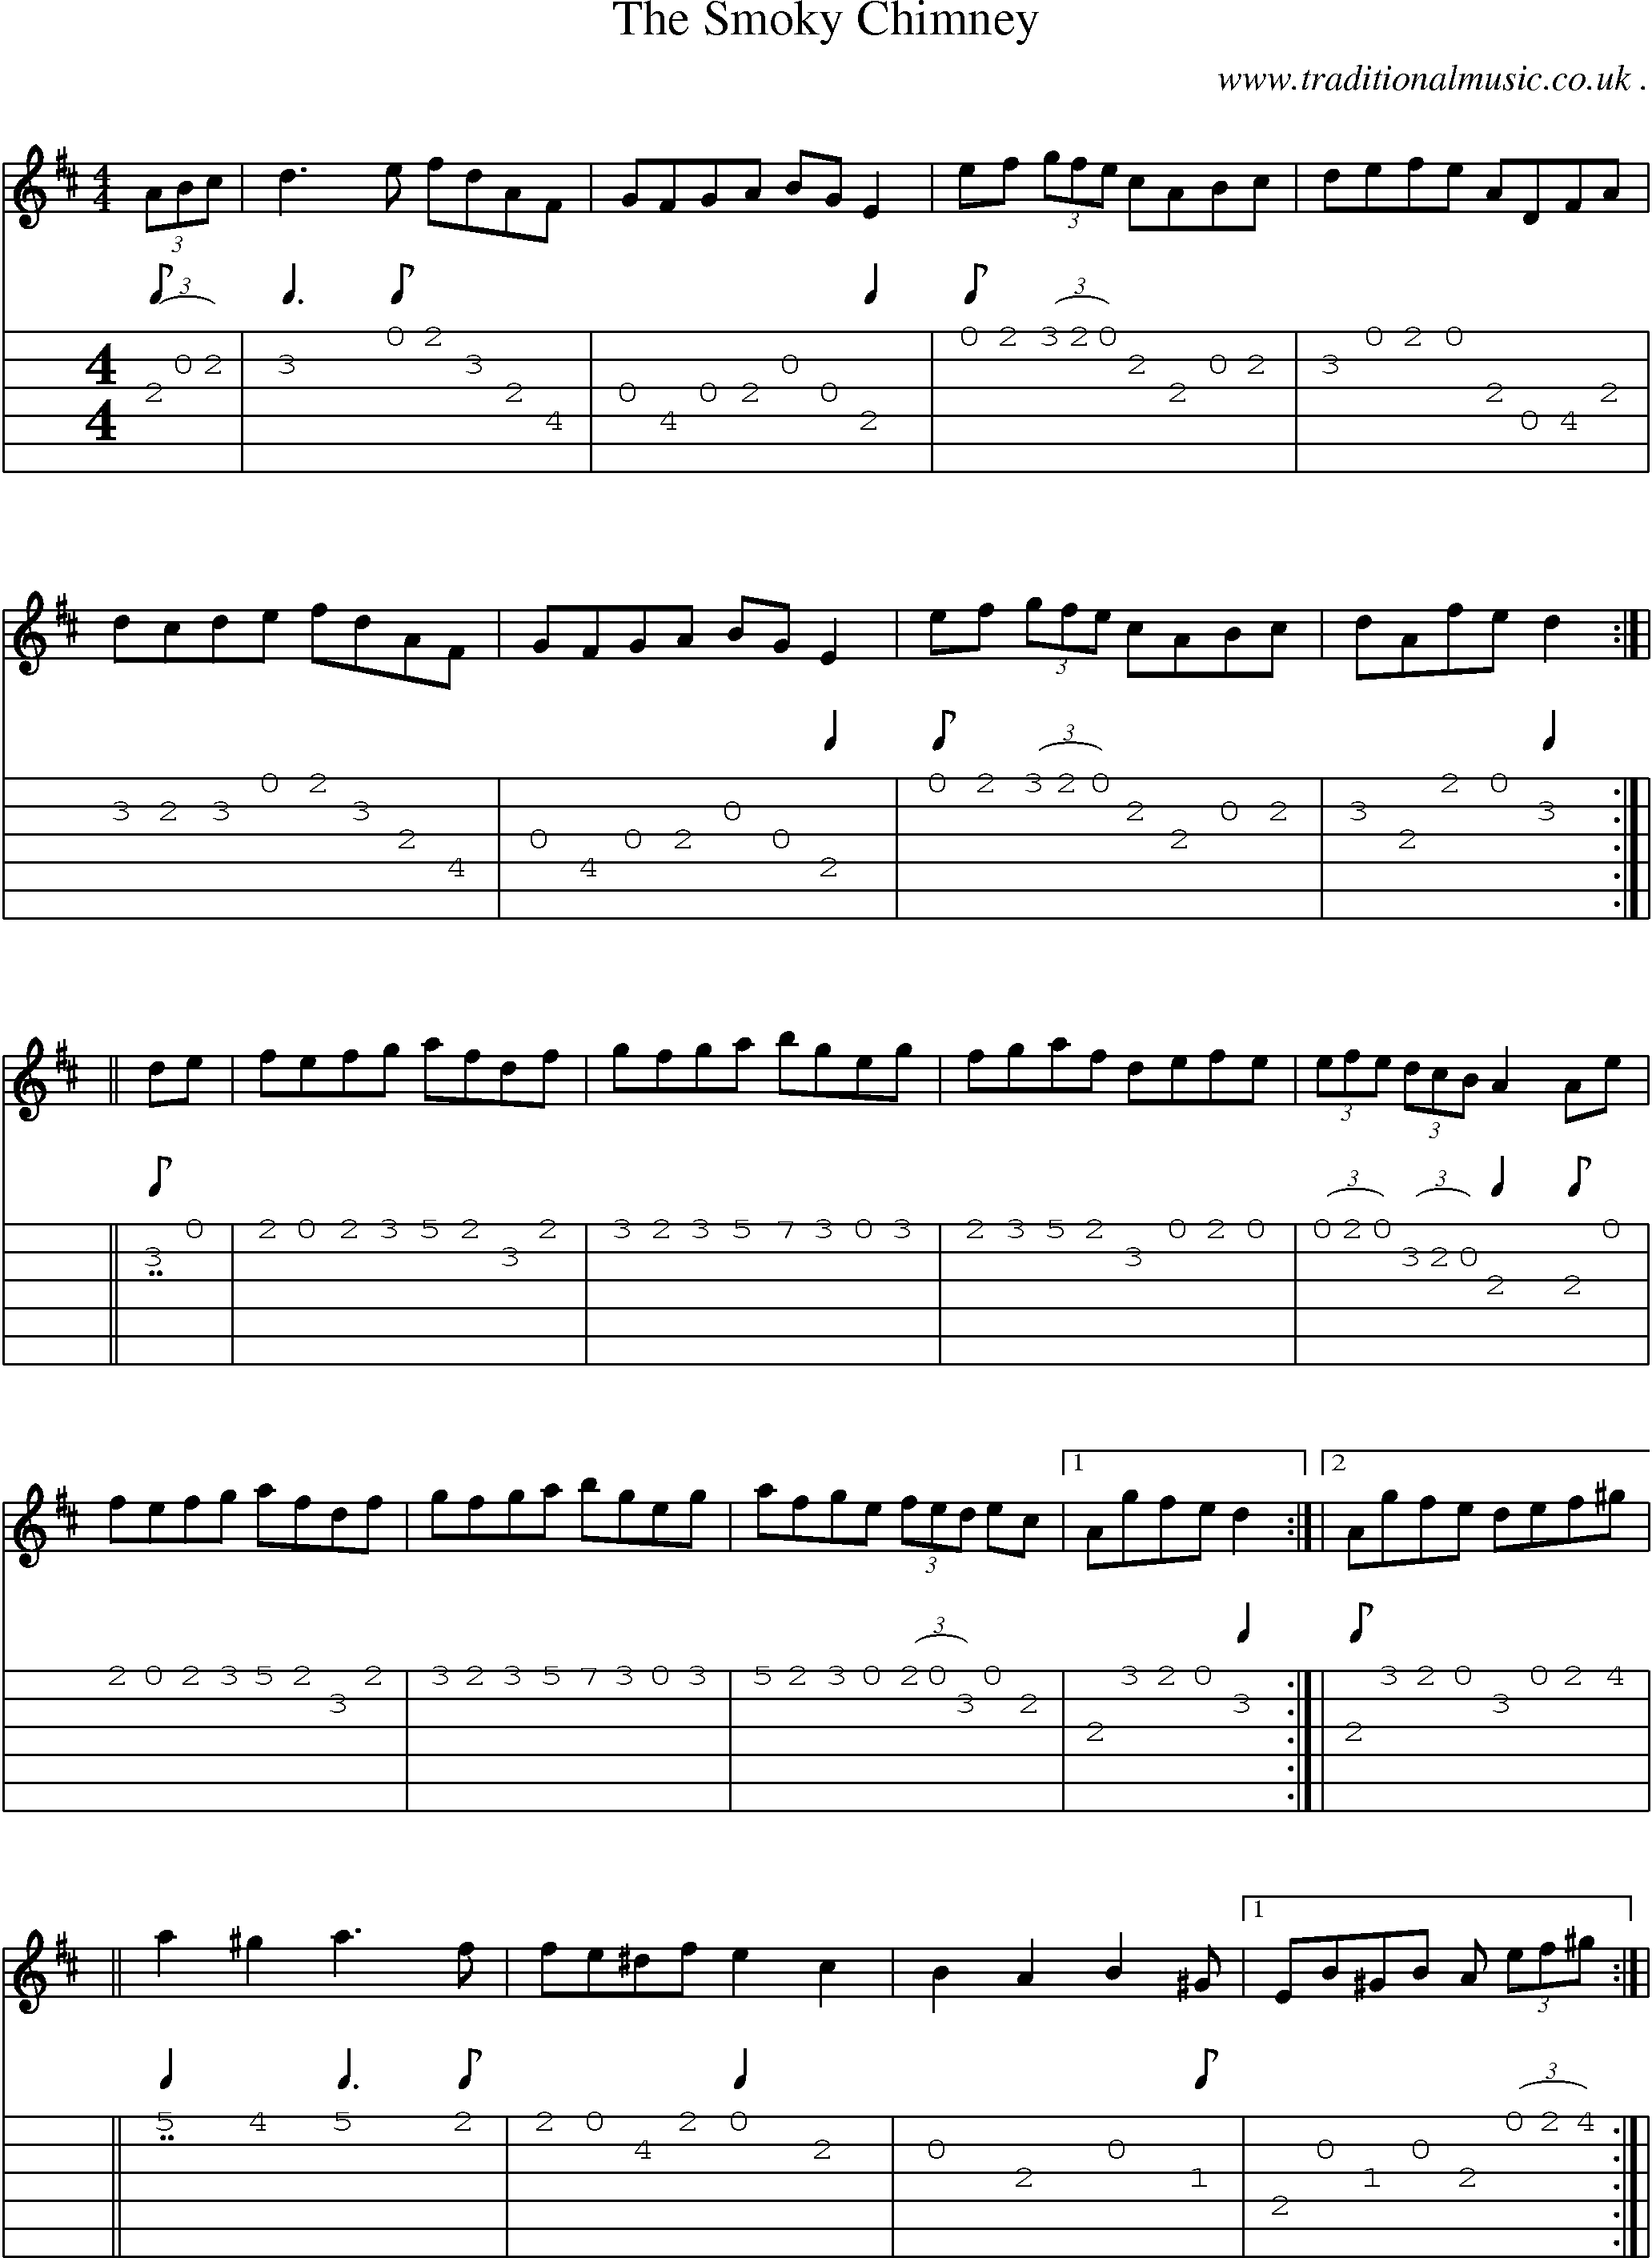 Sheet-Music and Guitar Tabs for The Smoky Chimney